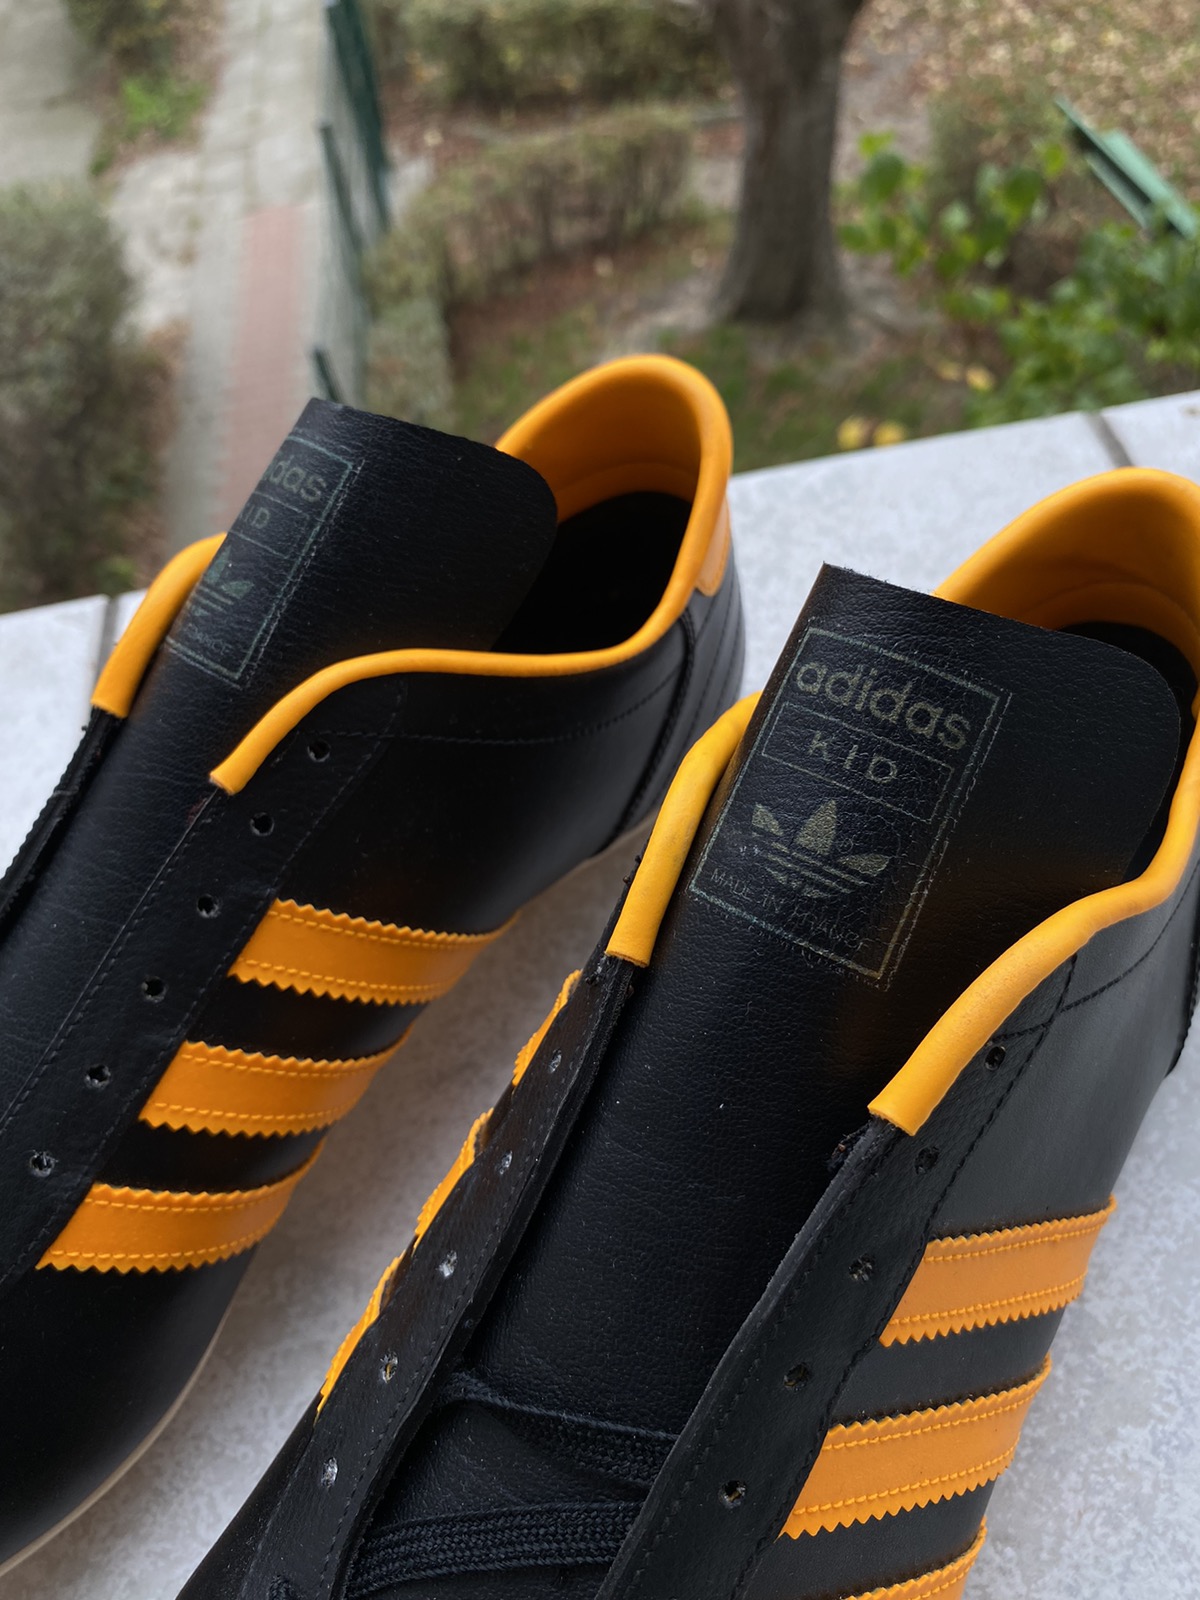 Adidas Kid made in France 70-80s football boots - 2